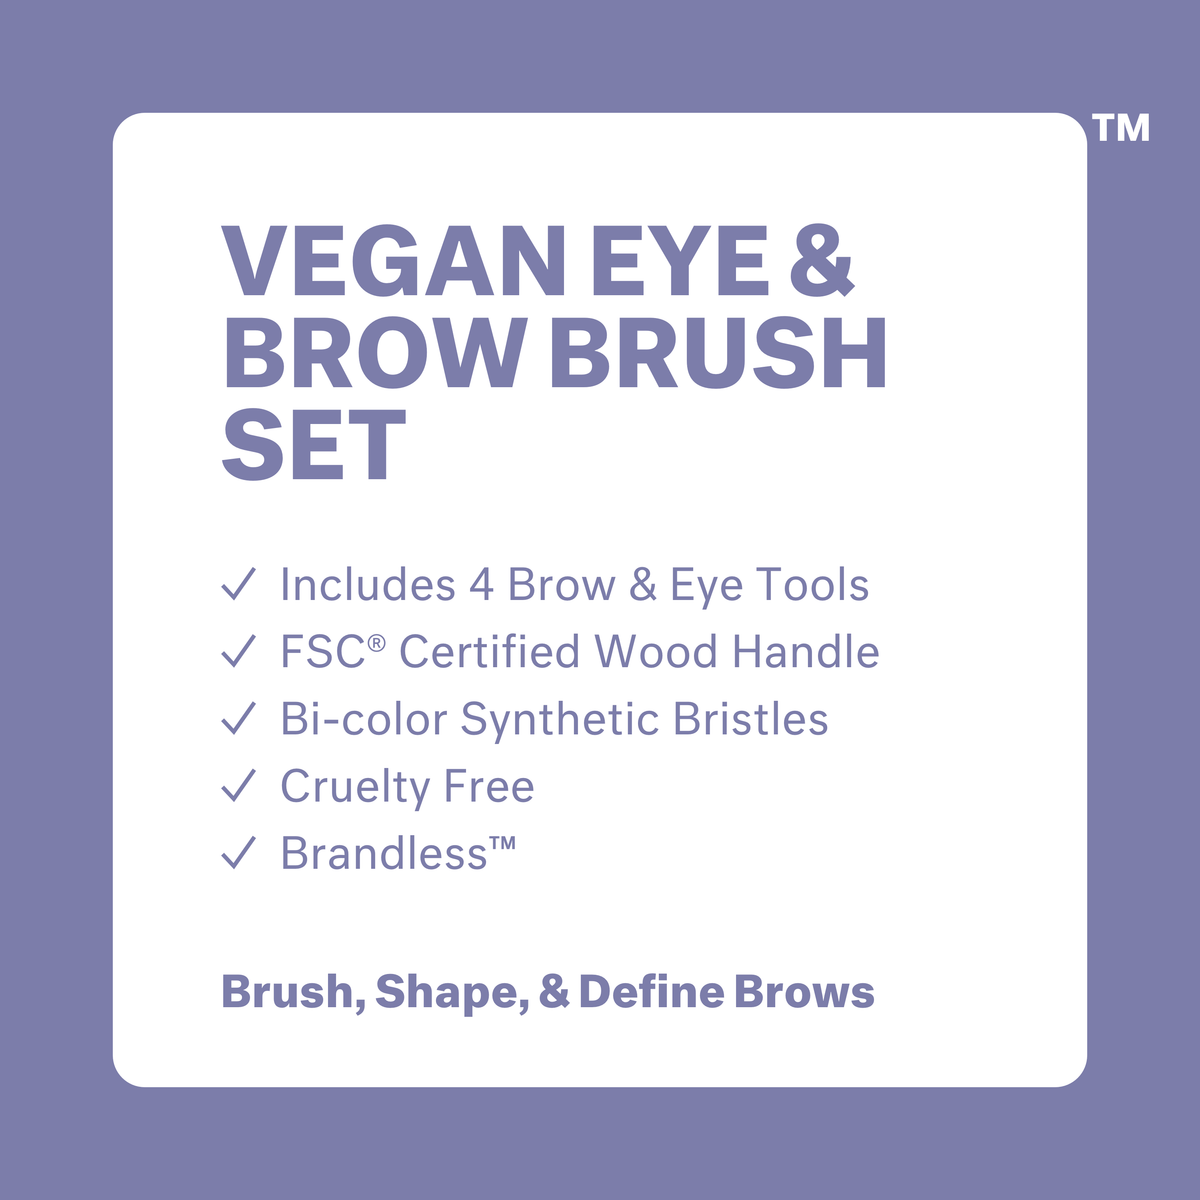 Vegan Eye and Brow Brush Set: includes 4 brow and eye tools, FSC certified wood handle, bi-color synthetic bristles. Cruelty free. Brandless. Brush, shape, and define brows.